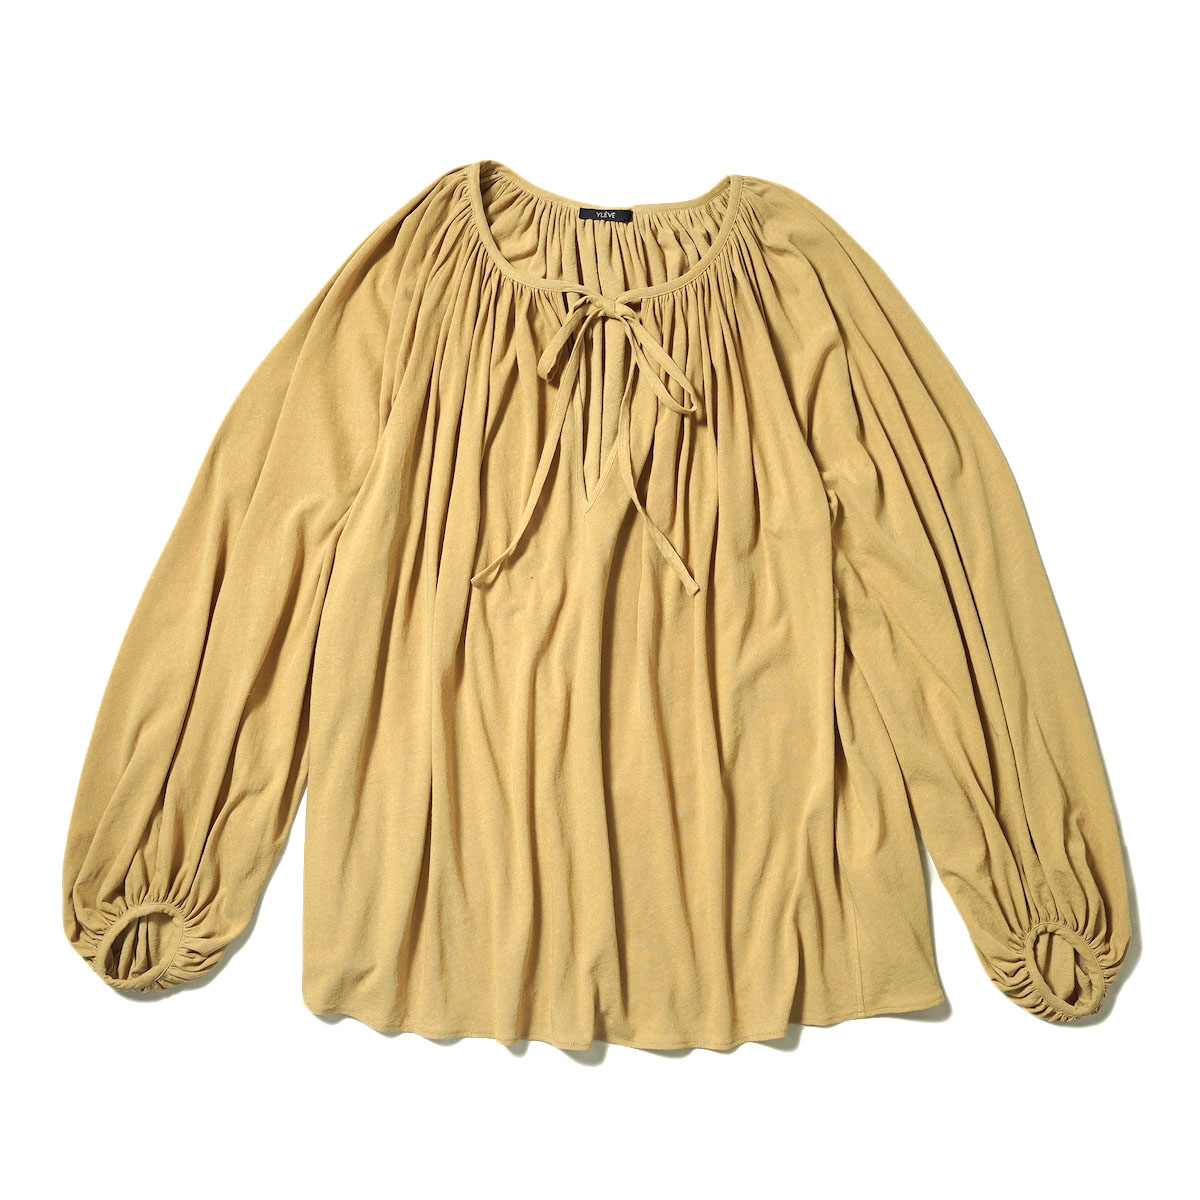 YLEVE / COTTON LINEN SHEER JERSEY PEASANT BL (Ocre)